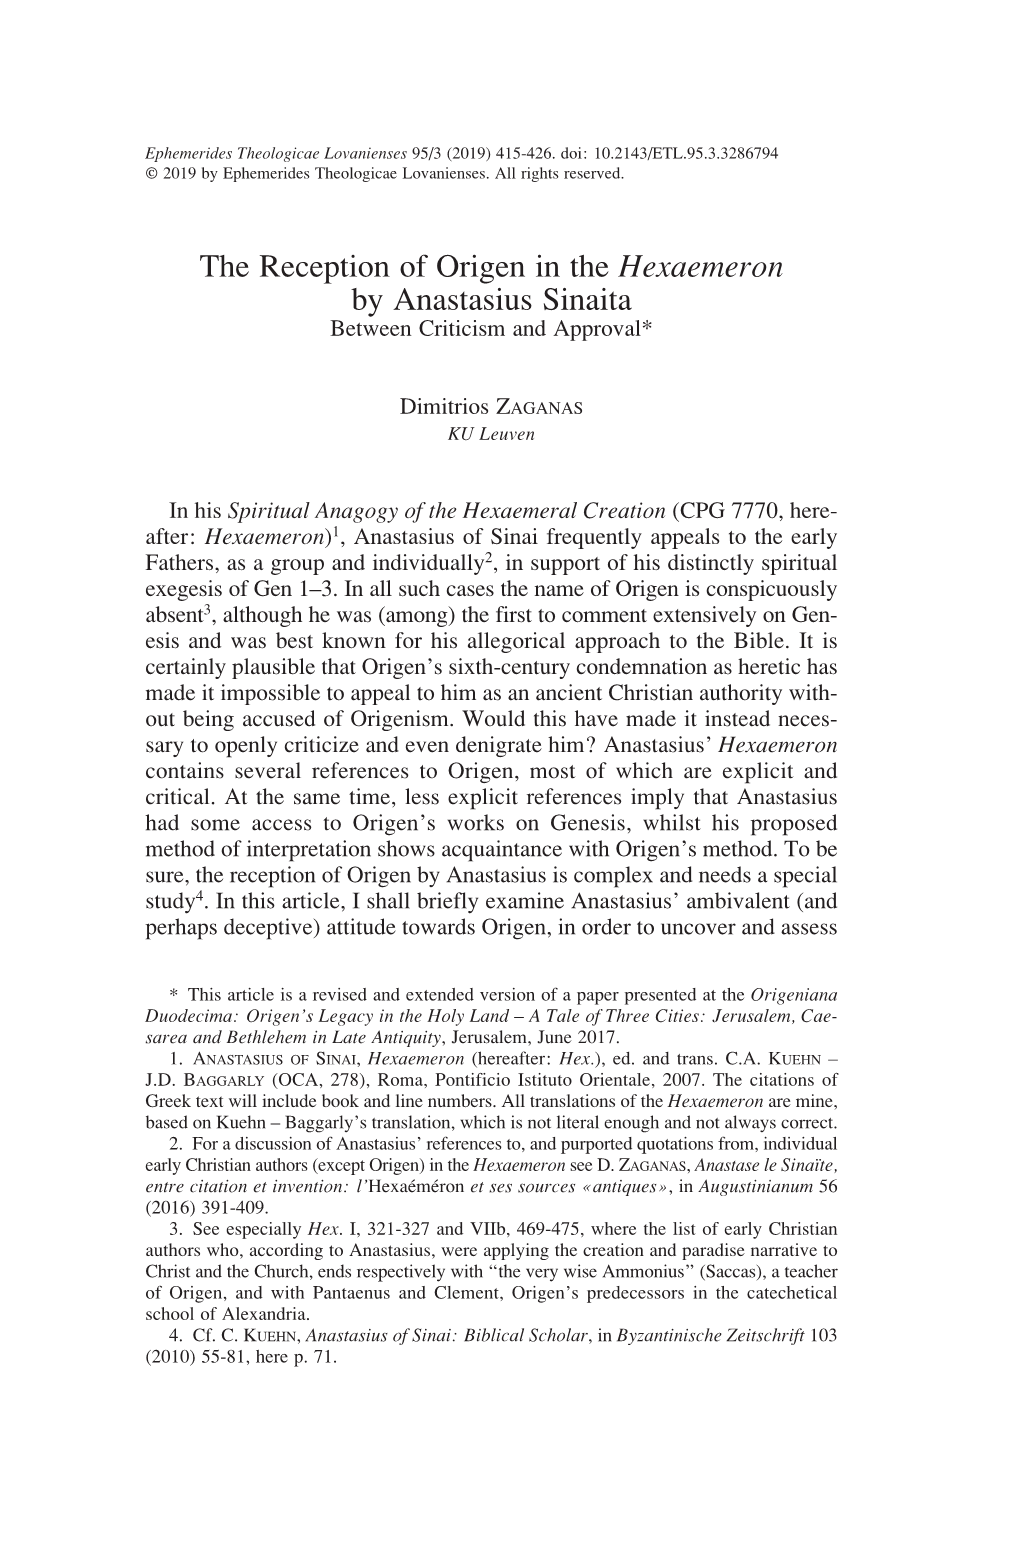 The Reception of Origen in the Hexaemeron by Anastasius Sinaita Between Criticism and Approval*